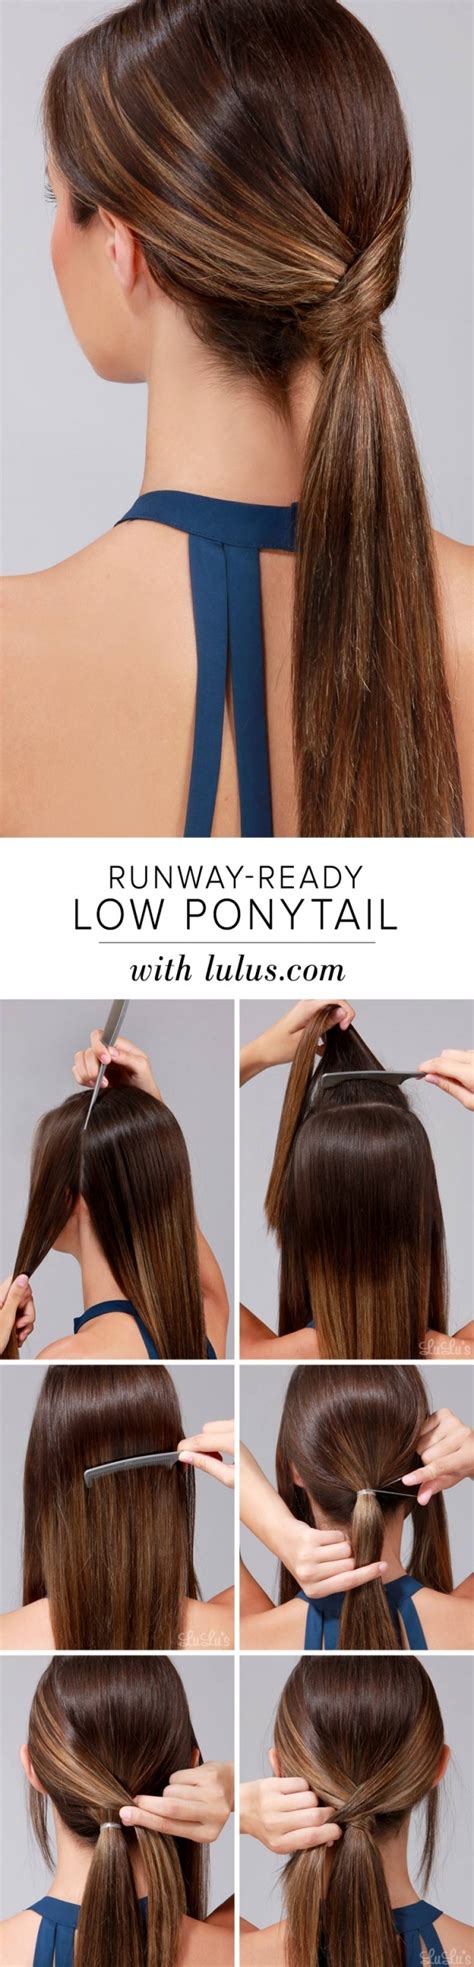 15 Simple Yet Stunning Hairstyle Tutorials For Lazy Women Styles Weekly